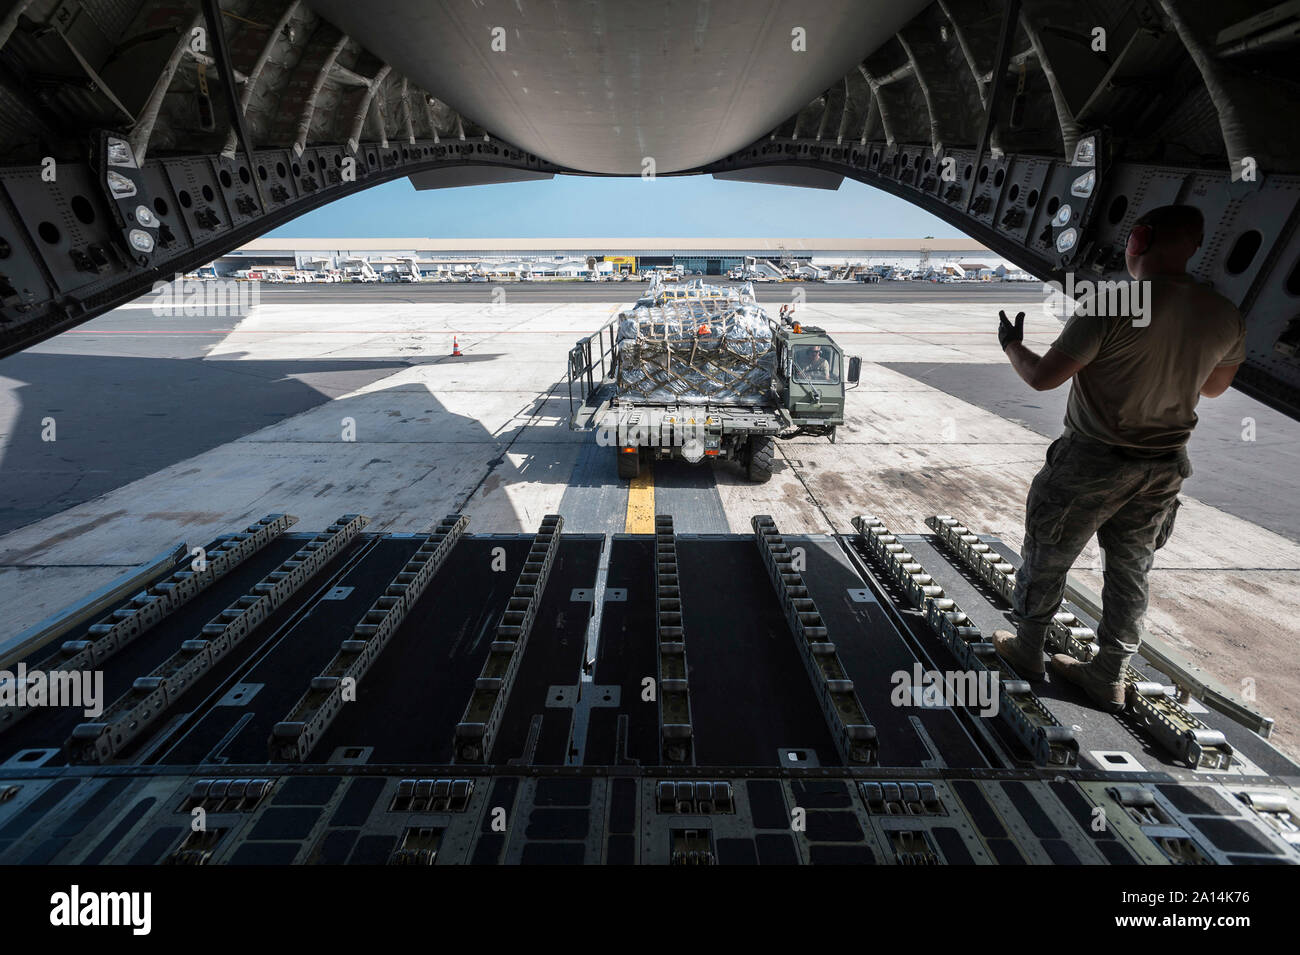 Airmen offload cargo pallets from a C-17 Globemaster III. Stock Photo